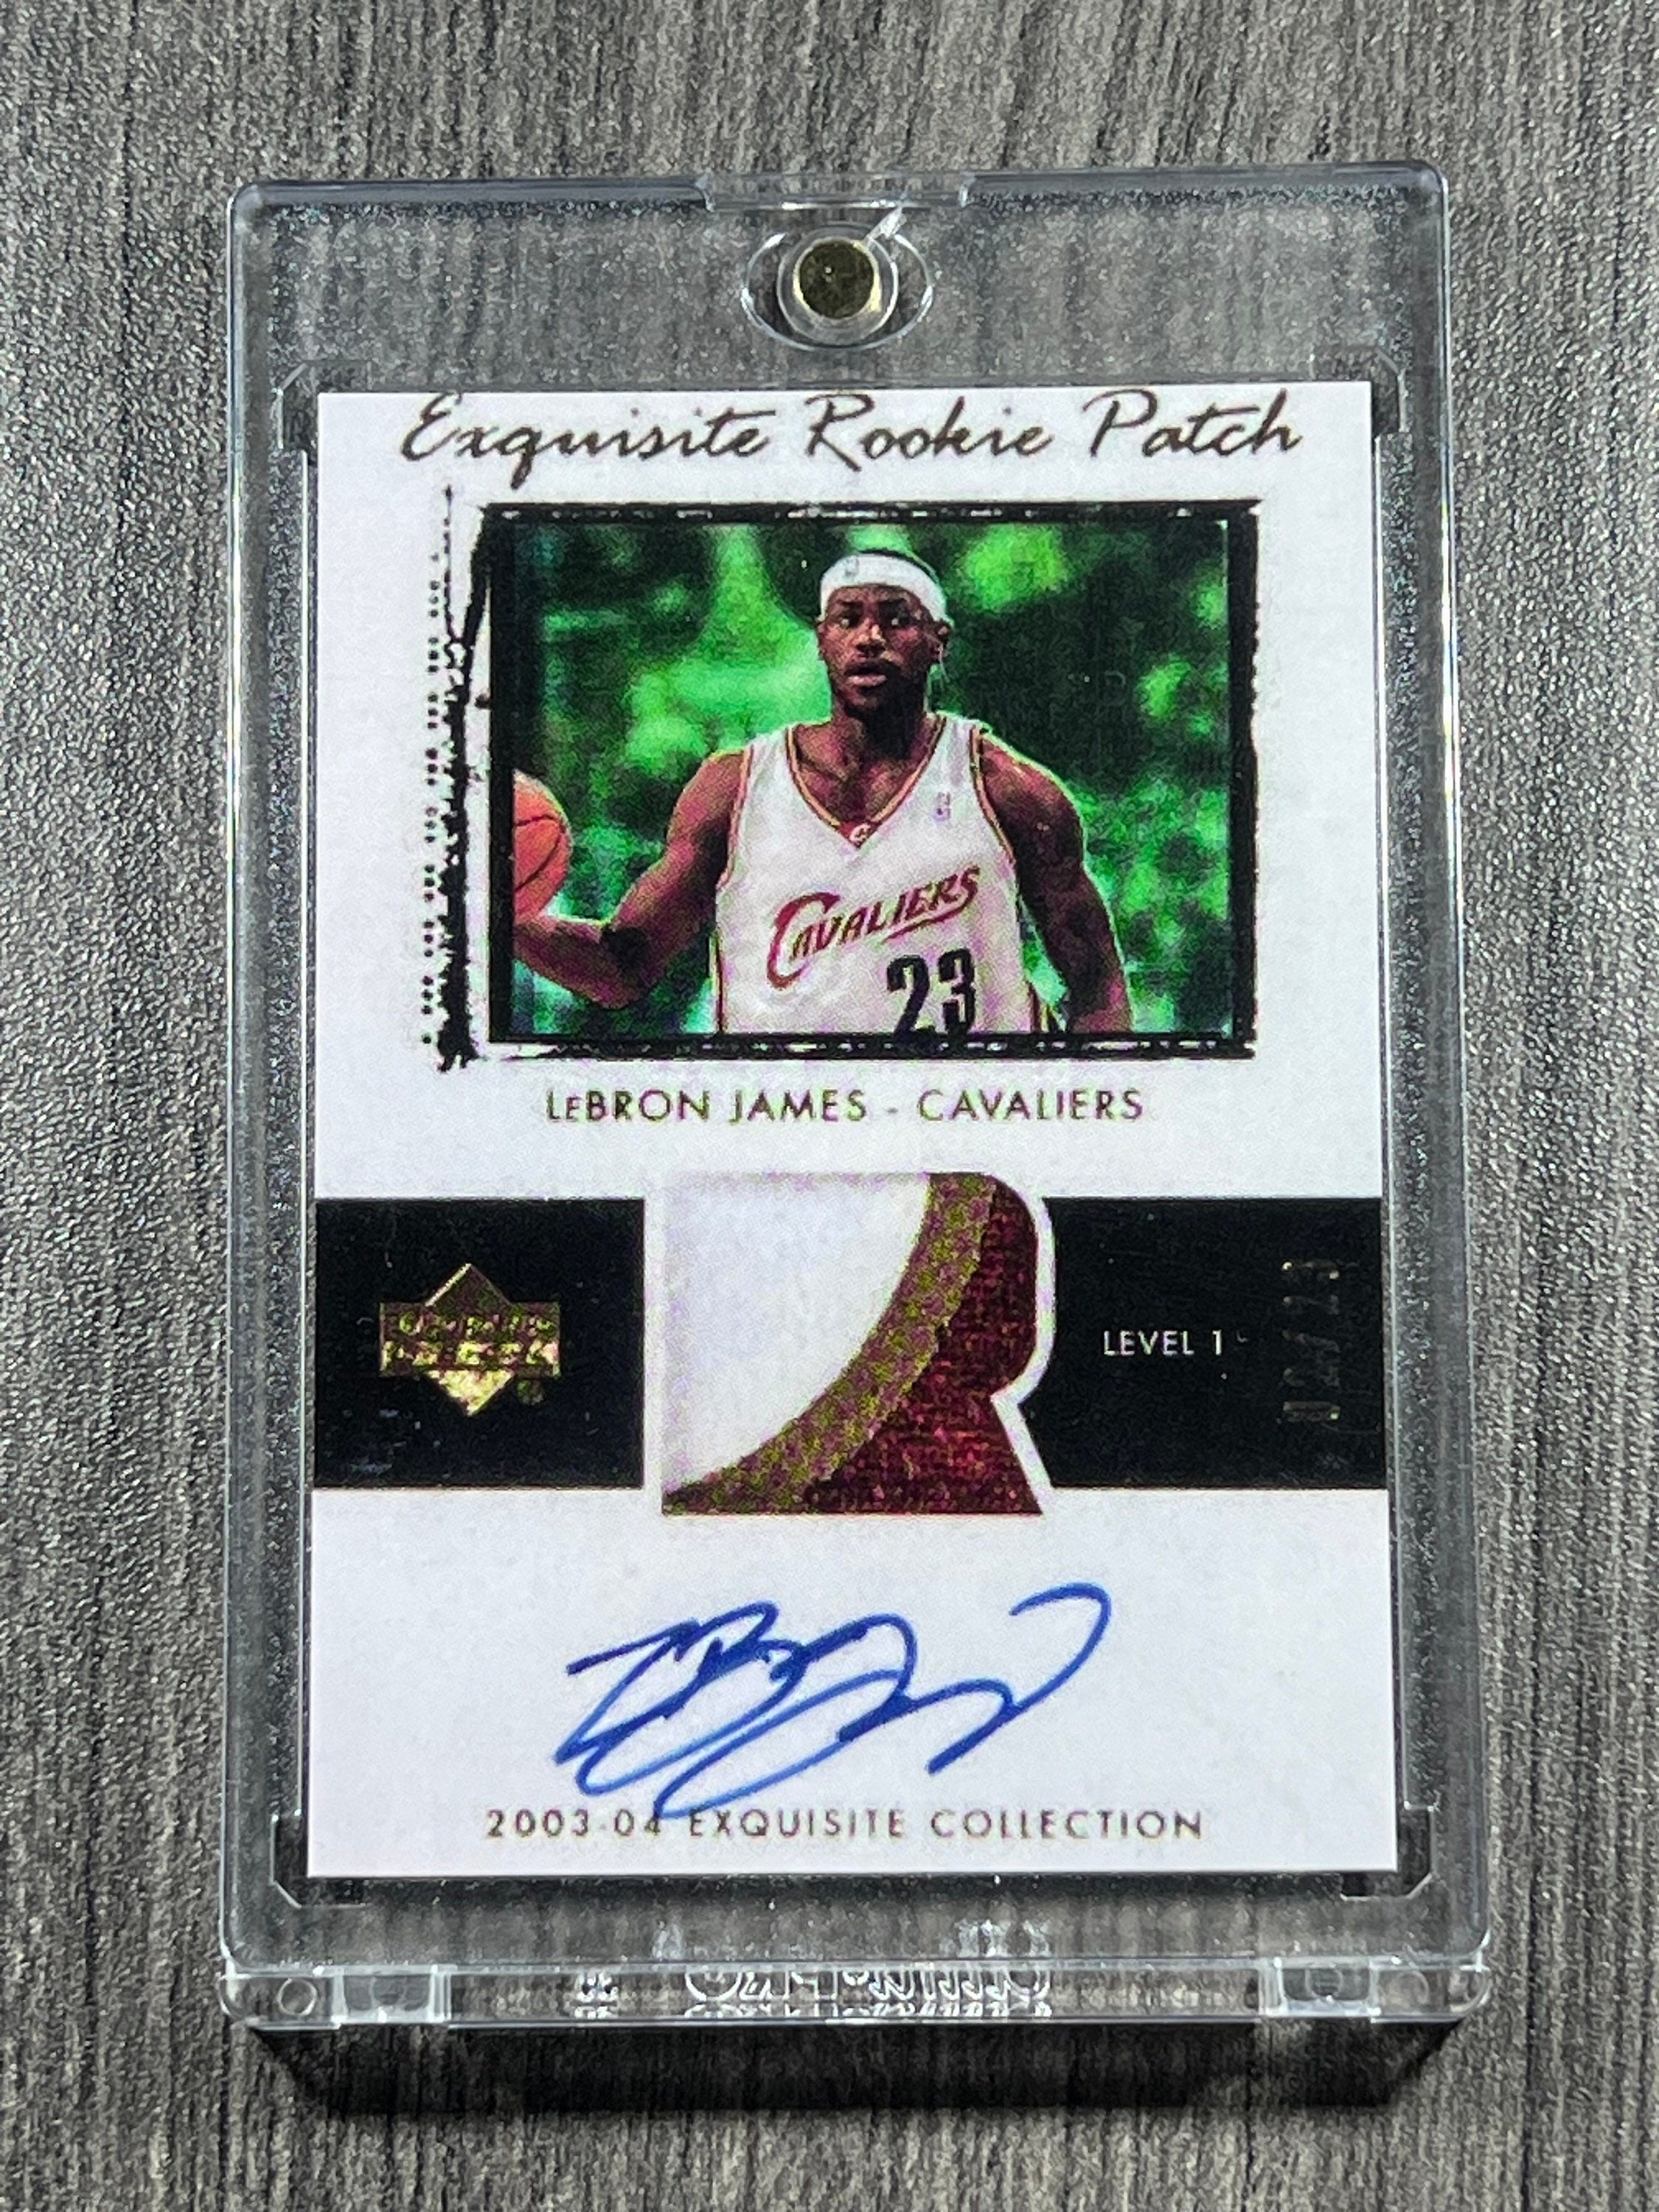 LeBron James Signed Lakers City Edition Jersey UpperDeck PSA/DNA  Authentic